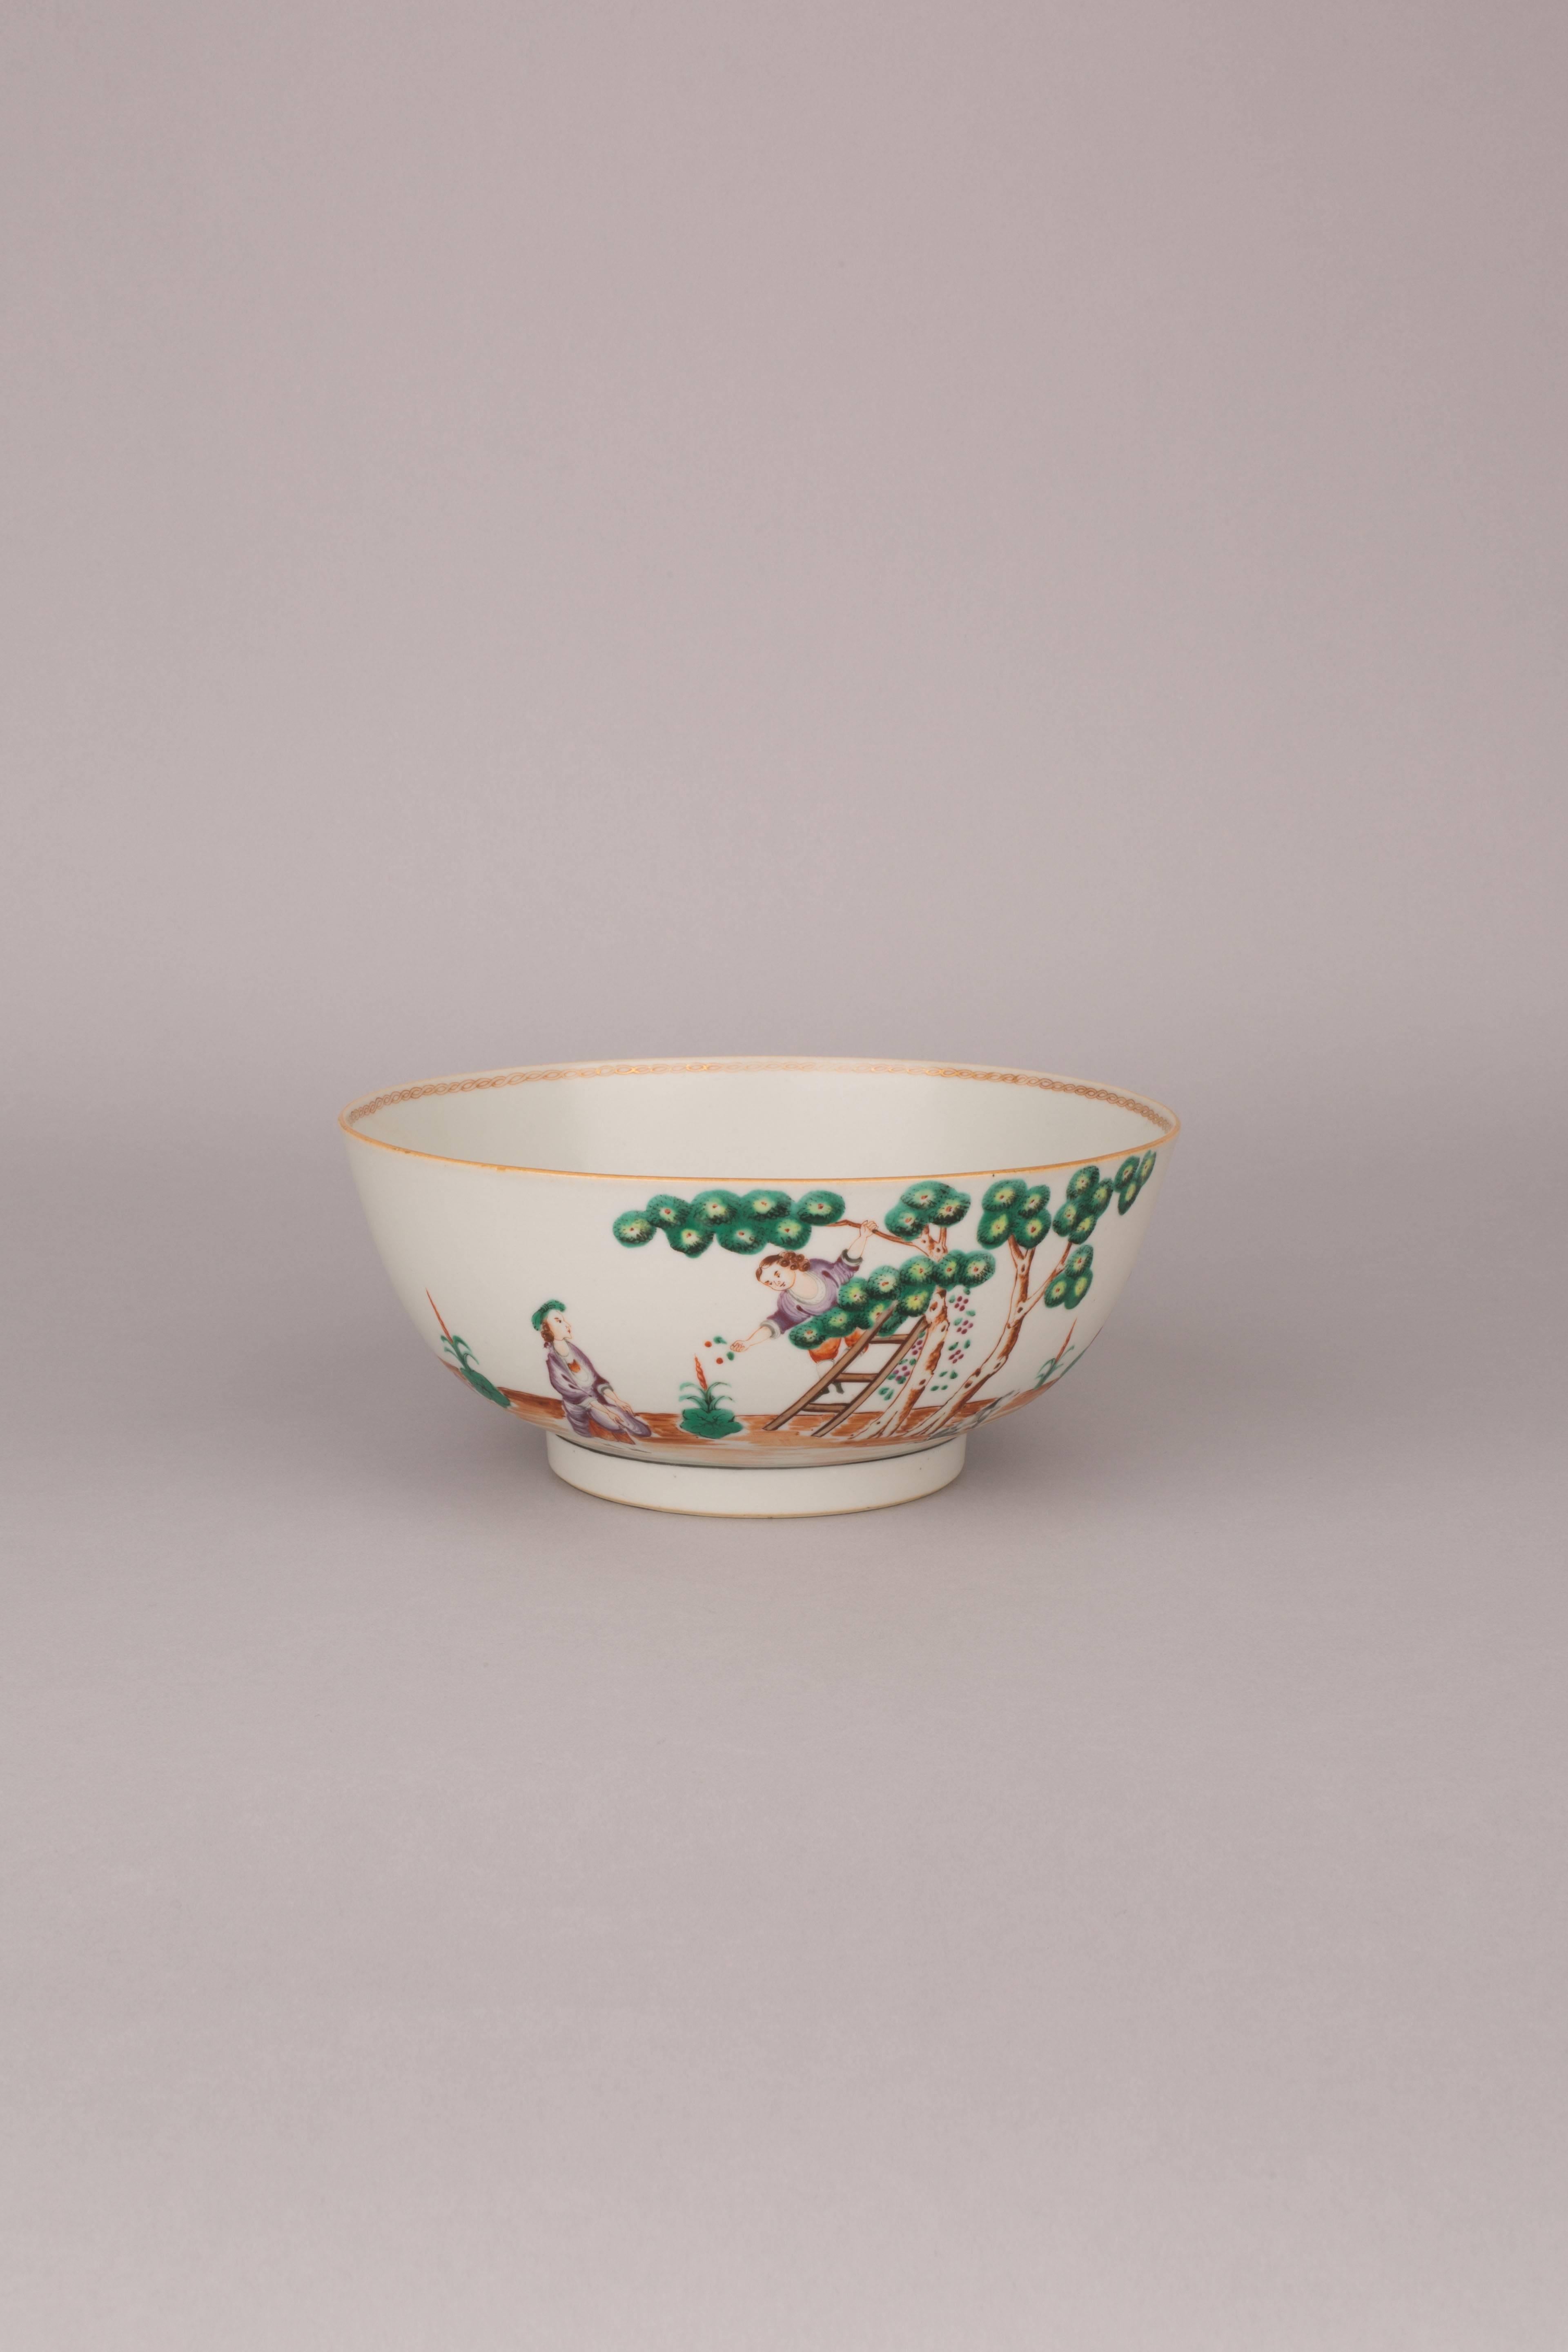 Qing A Chinese export porcelain famille rose deep bowl, ‘Cherry Pickers’, 18th century